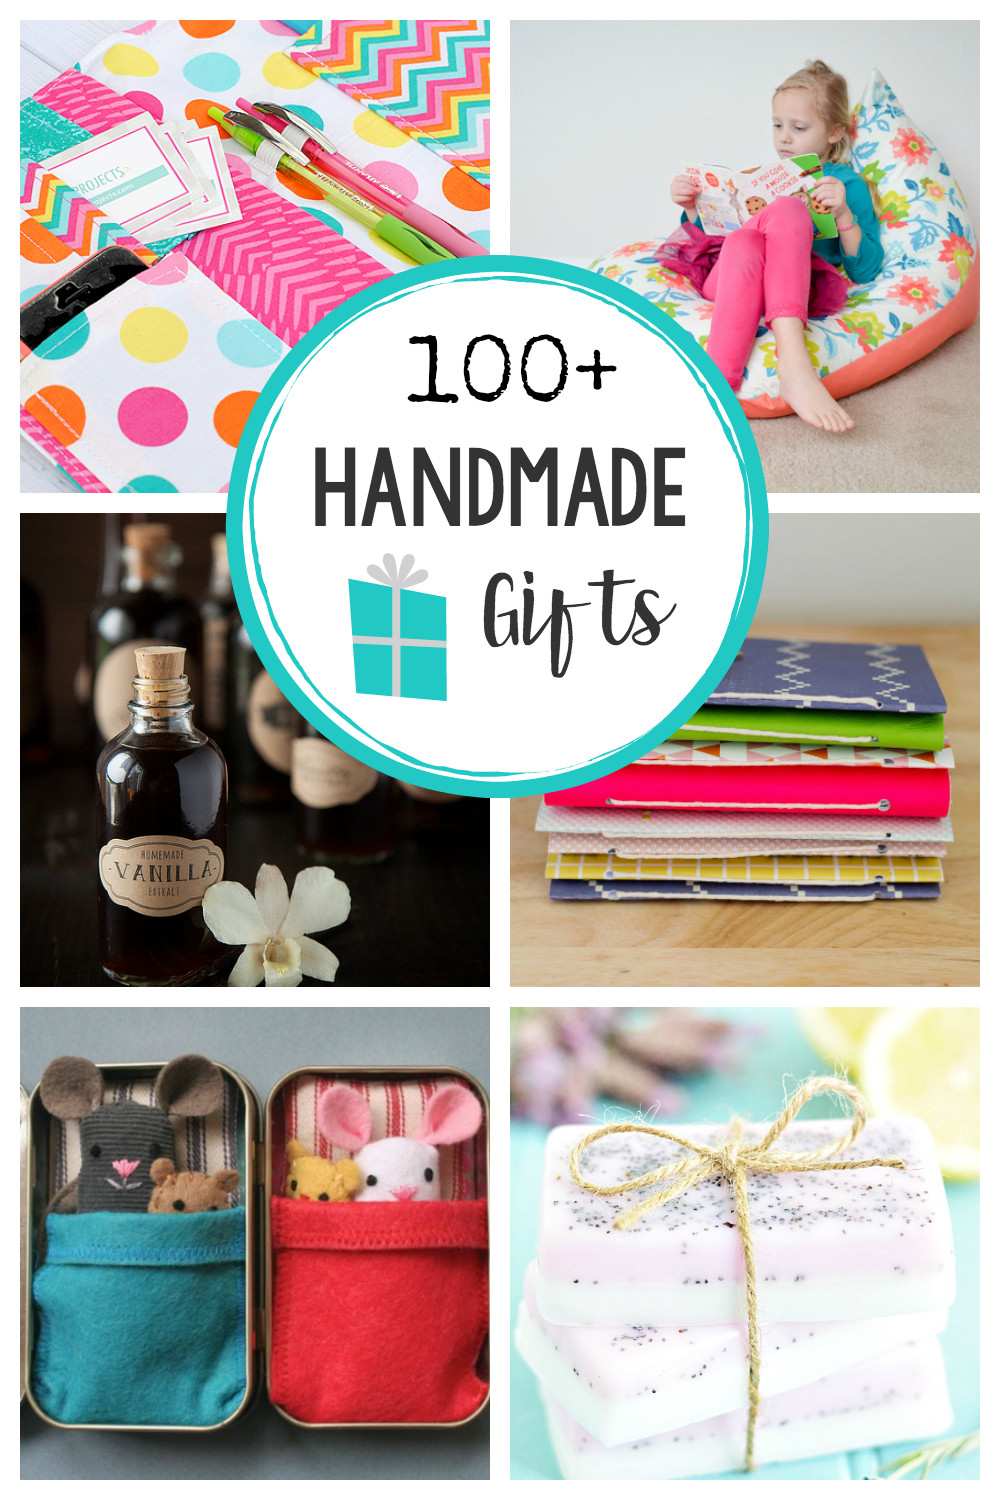 Handmade Christmas Gifts For Kids
 Tons of Handmade Gifts 100 Ideas for Everyone on Your List